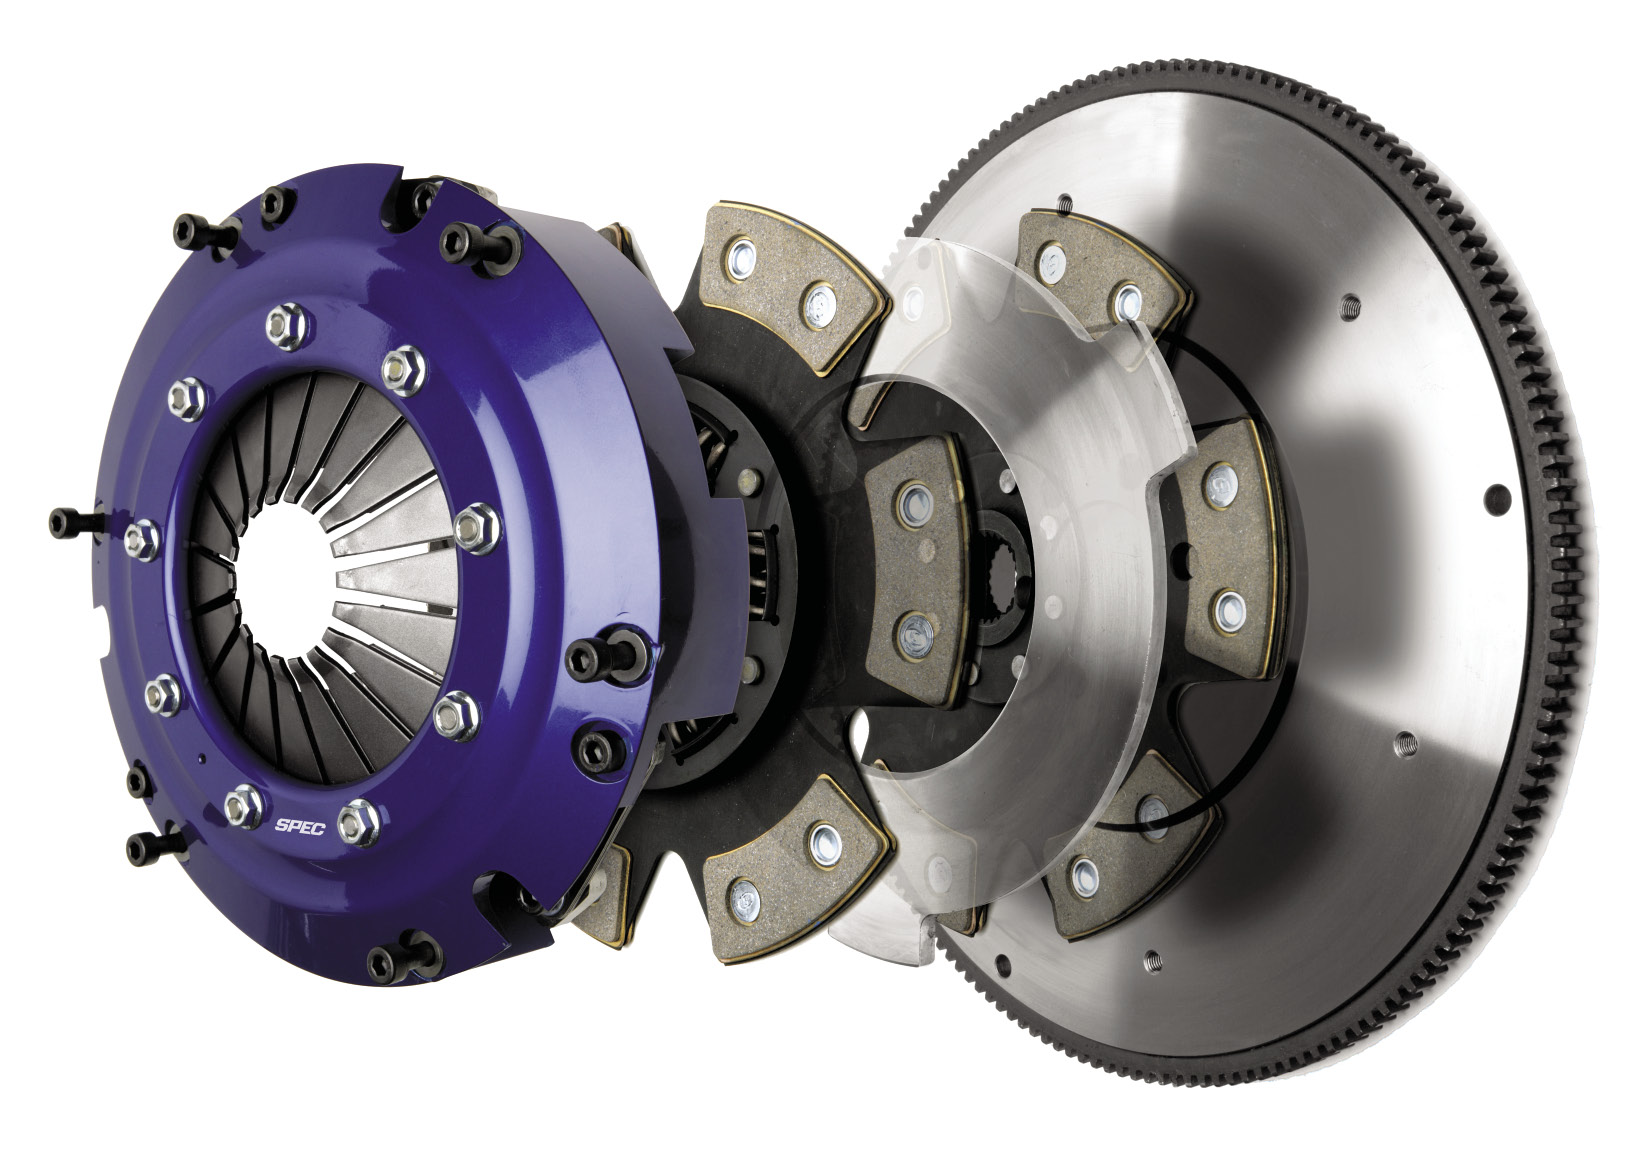 Spec Clutches & Fly Wheels: Mini and Super Twin Clutches